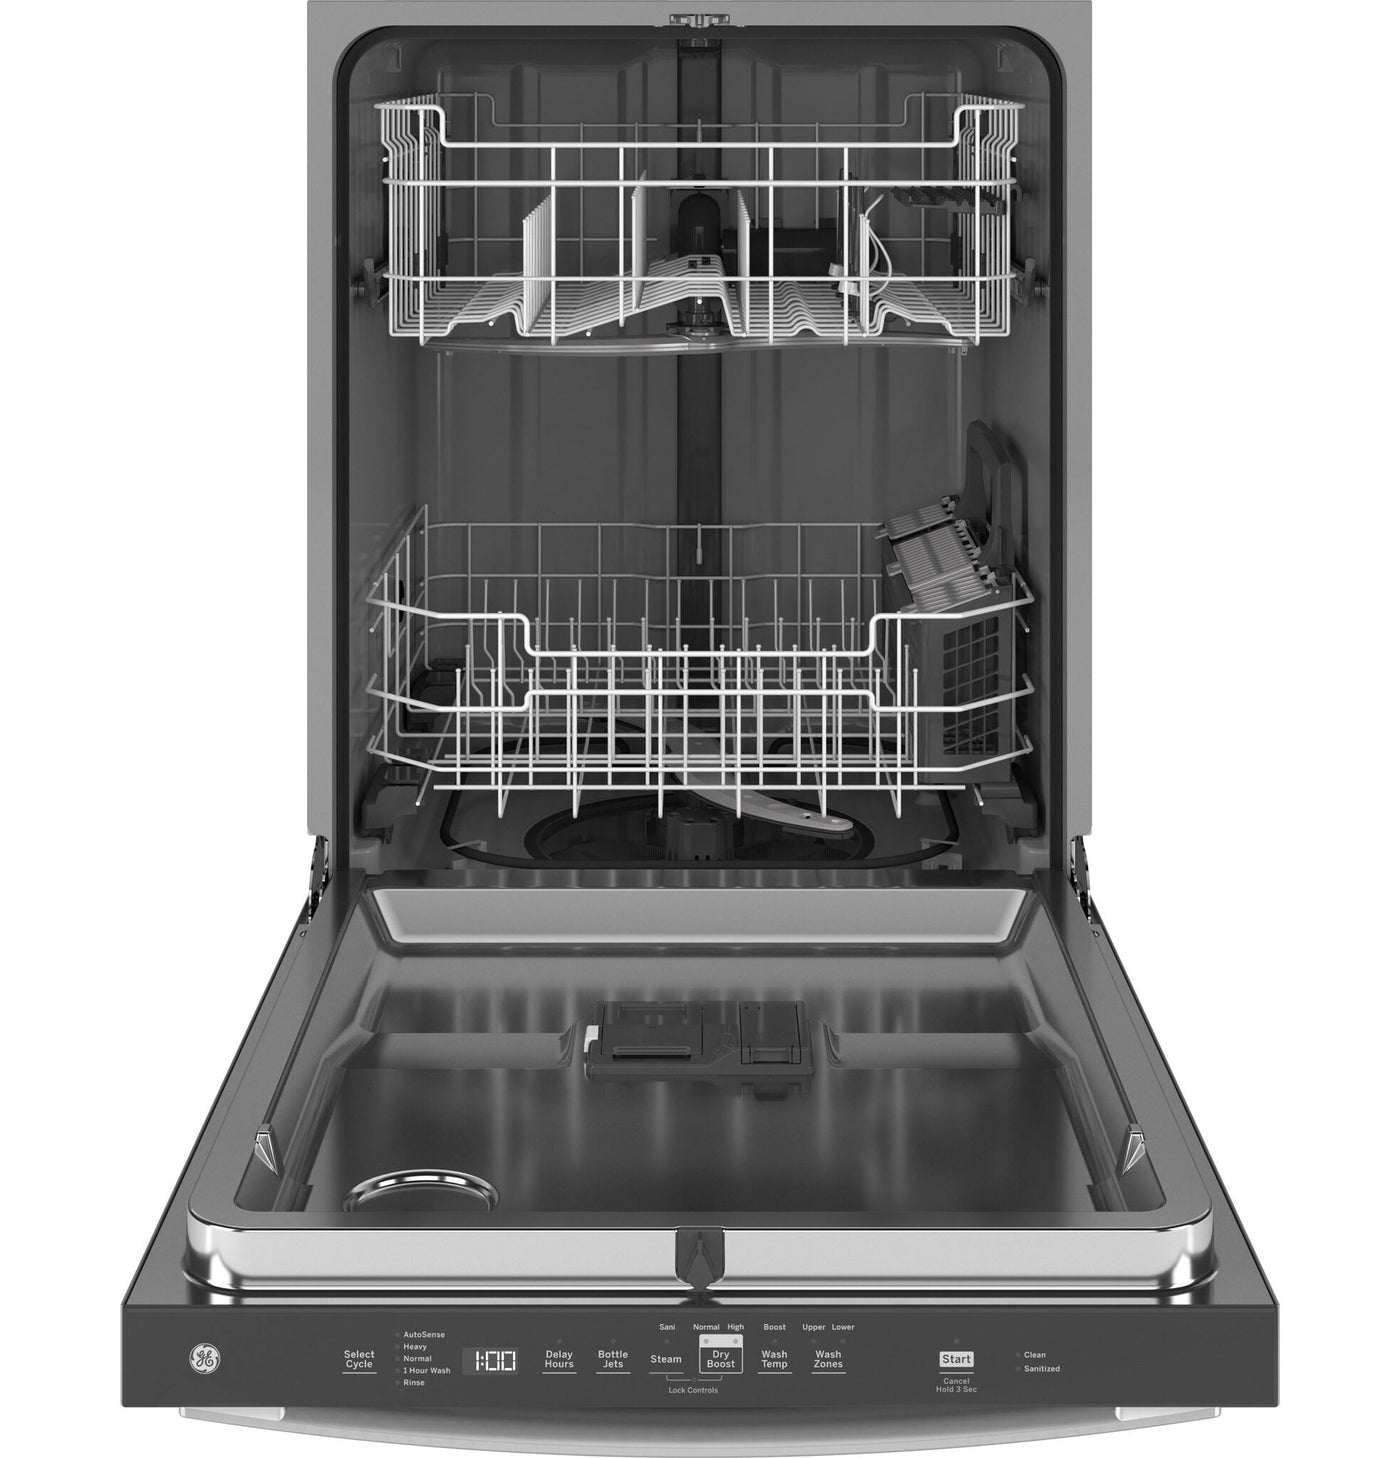 GE Stainless Steel Dishwasher with Sanitize Cycle - GDT635HSRSS